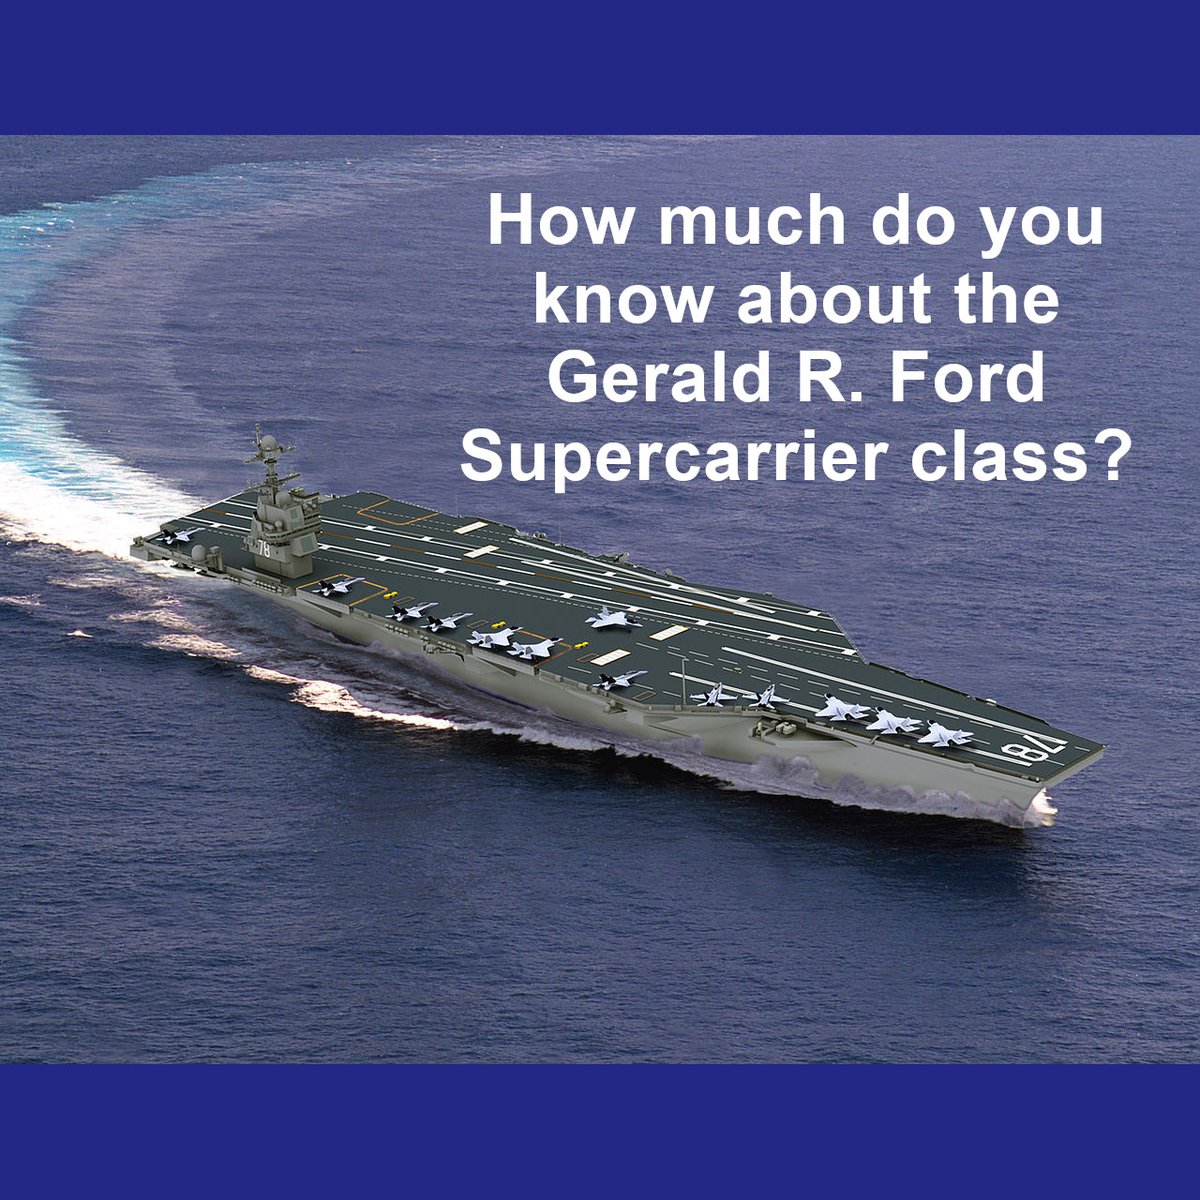 How much do you know about the Gerald R. Ford supercarrier class? Find out at 500ways.com/gerald-r-ford-… (#aircraftCarrier, #supercarrier, #GeraldRFord, #GeraldRFordAircraftCarrier, #USNavy, #nuclearAircraftCarrier, #nuclearShip, #nautical, #warships, #navalWarfare, #nuclearPower)